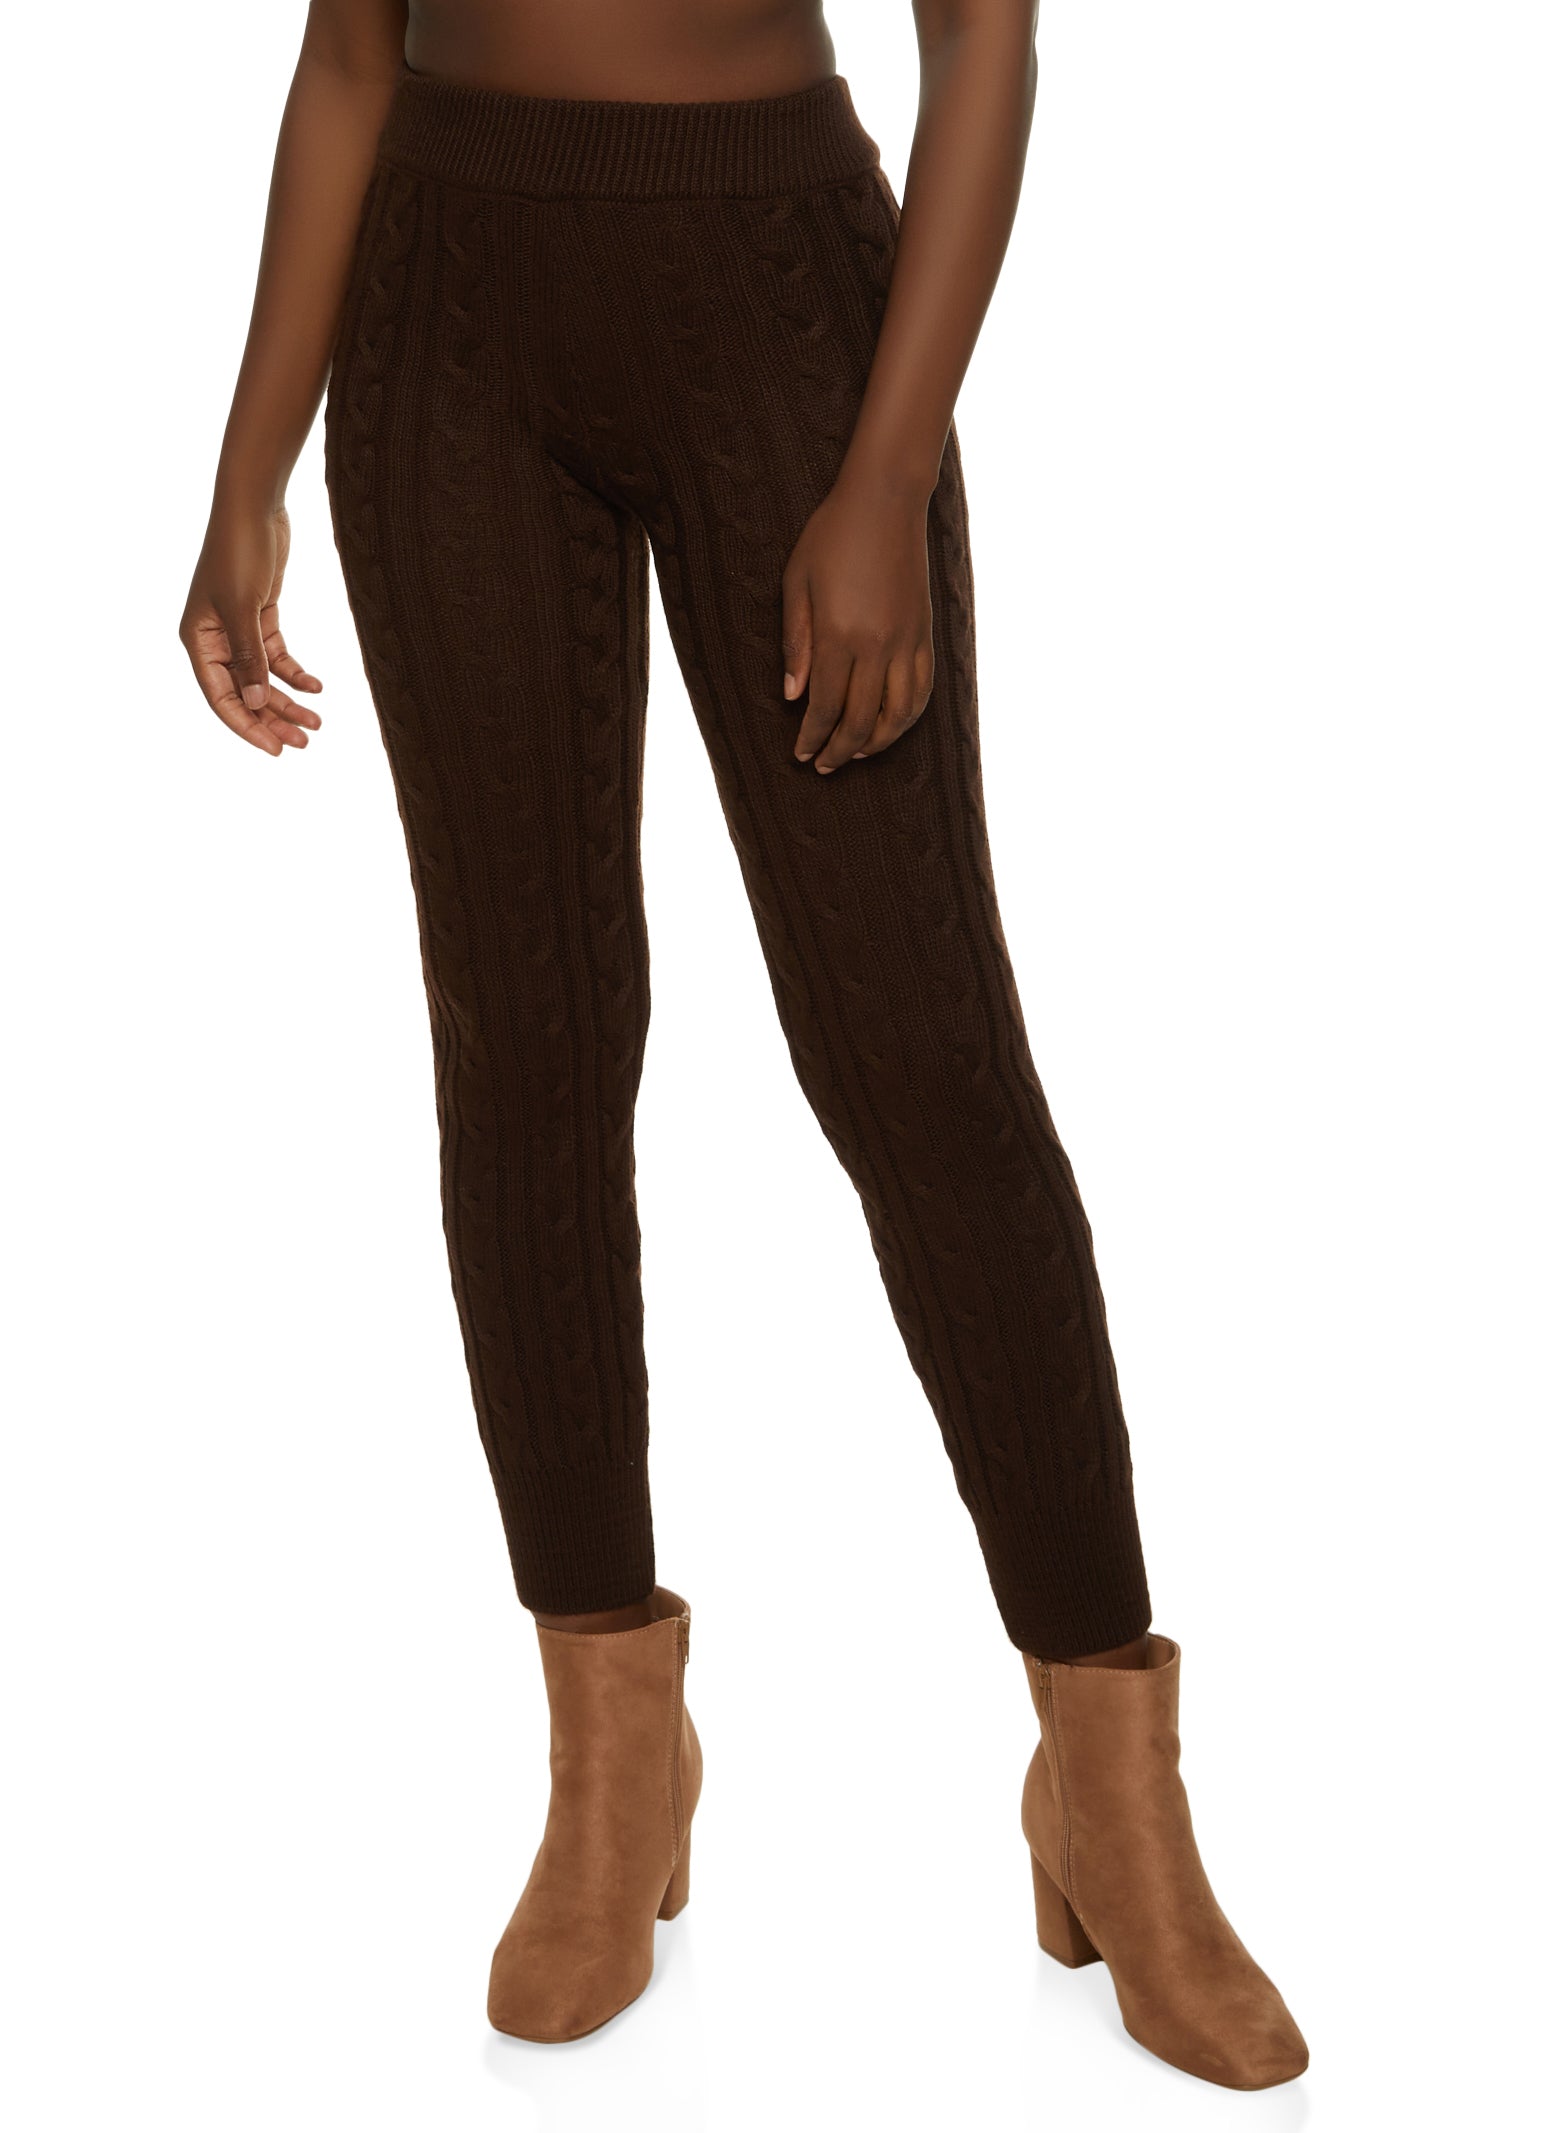 Cable Knit High Waist Leggings - Brown